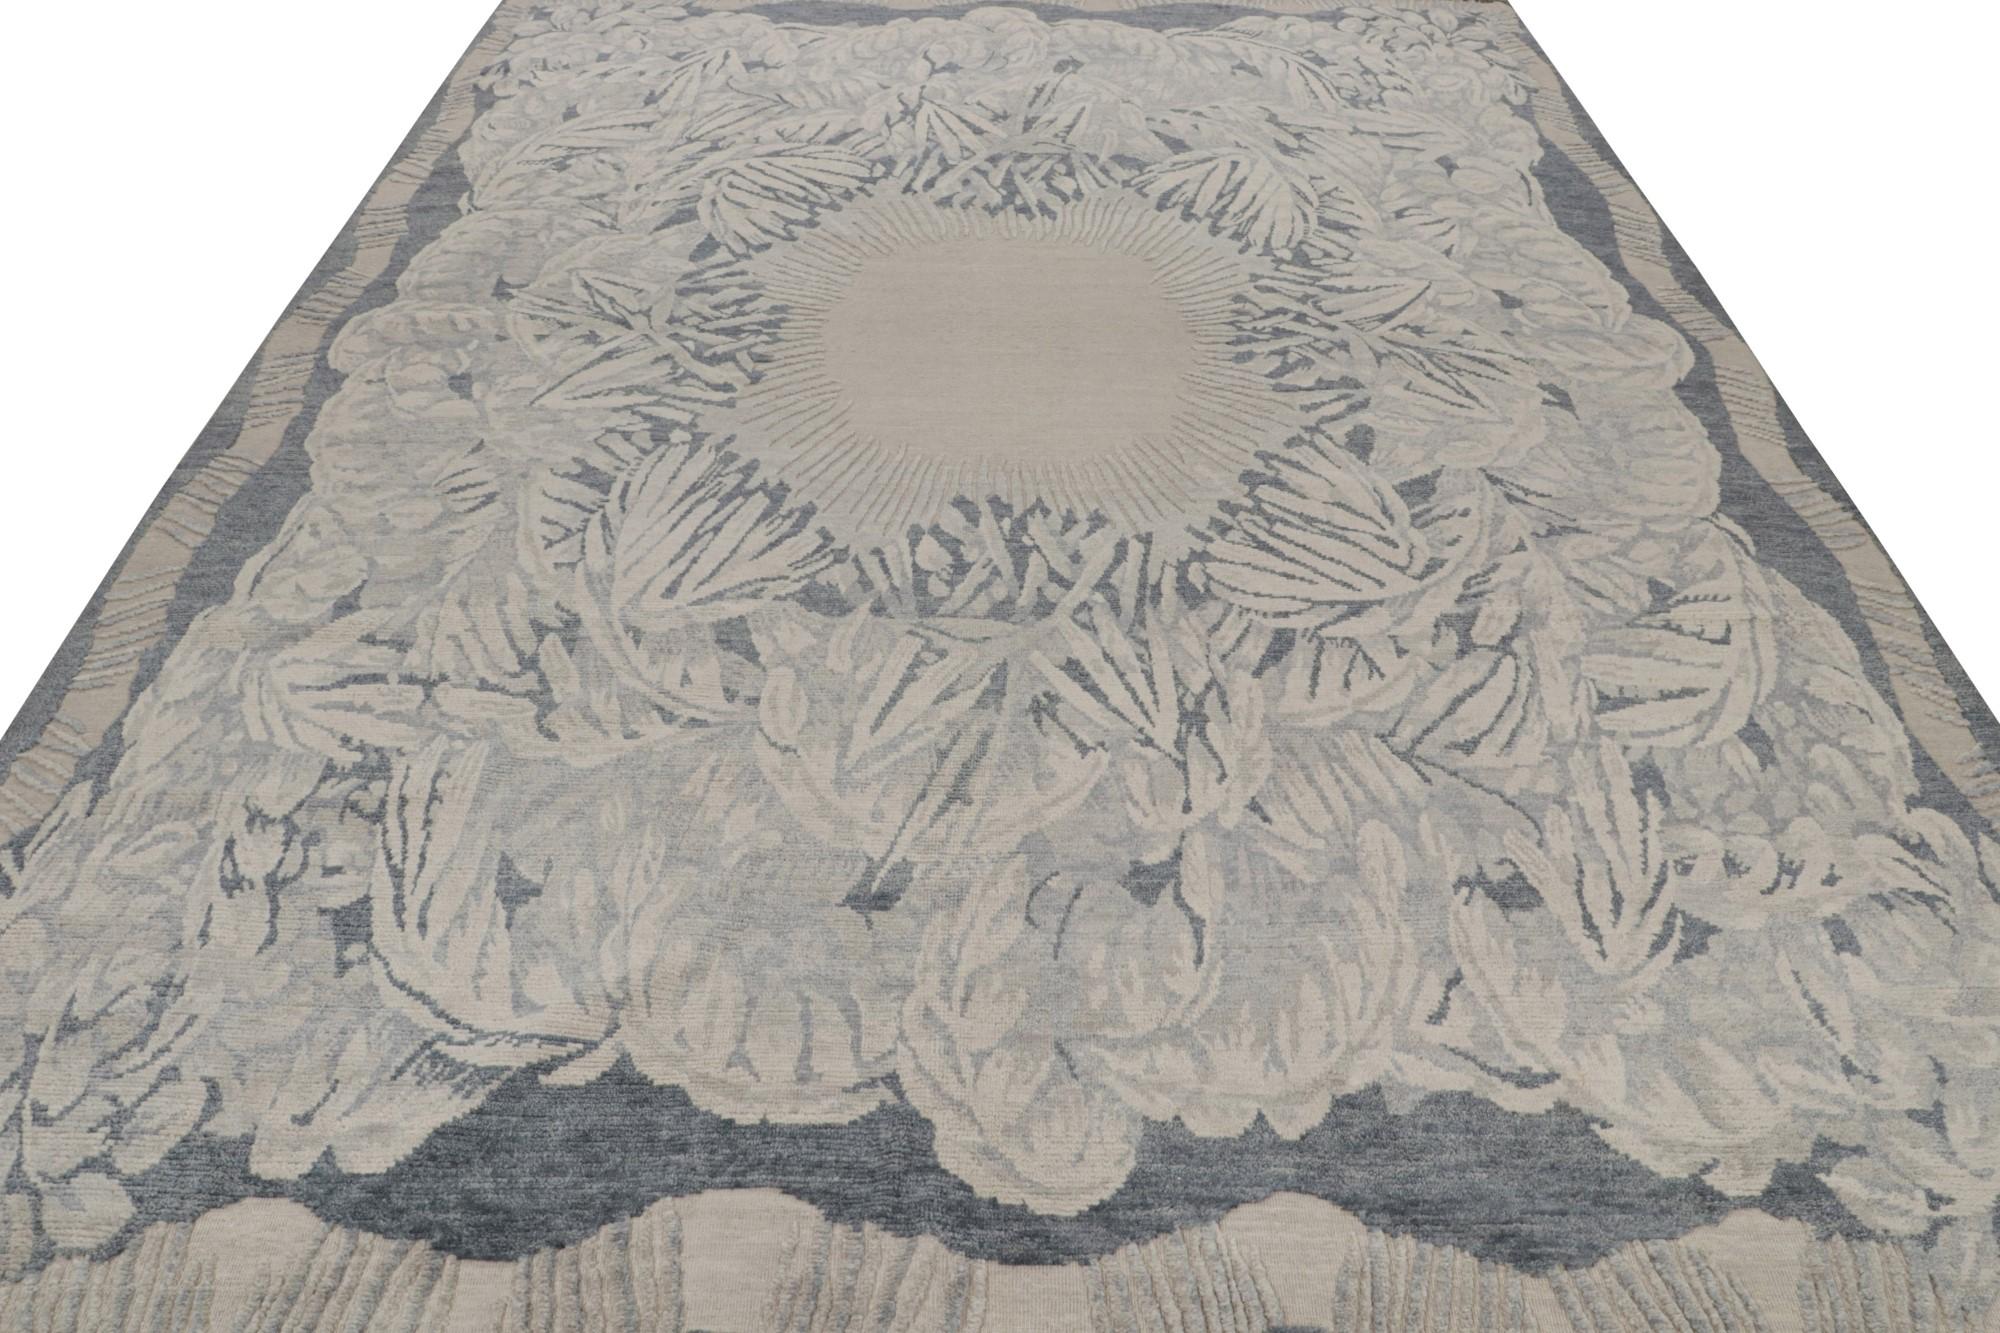 Indian Rug & Kilim’s French Style Art Deco rug in Blue, Grey & Beige Floral Patterns For Sale